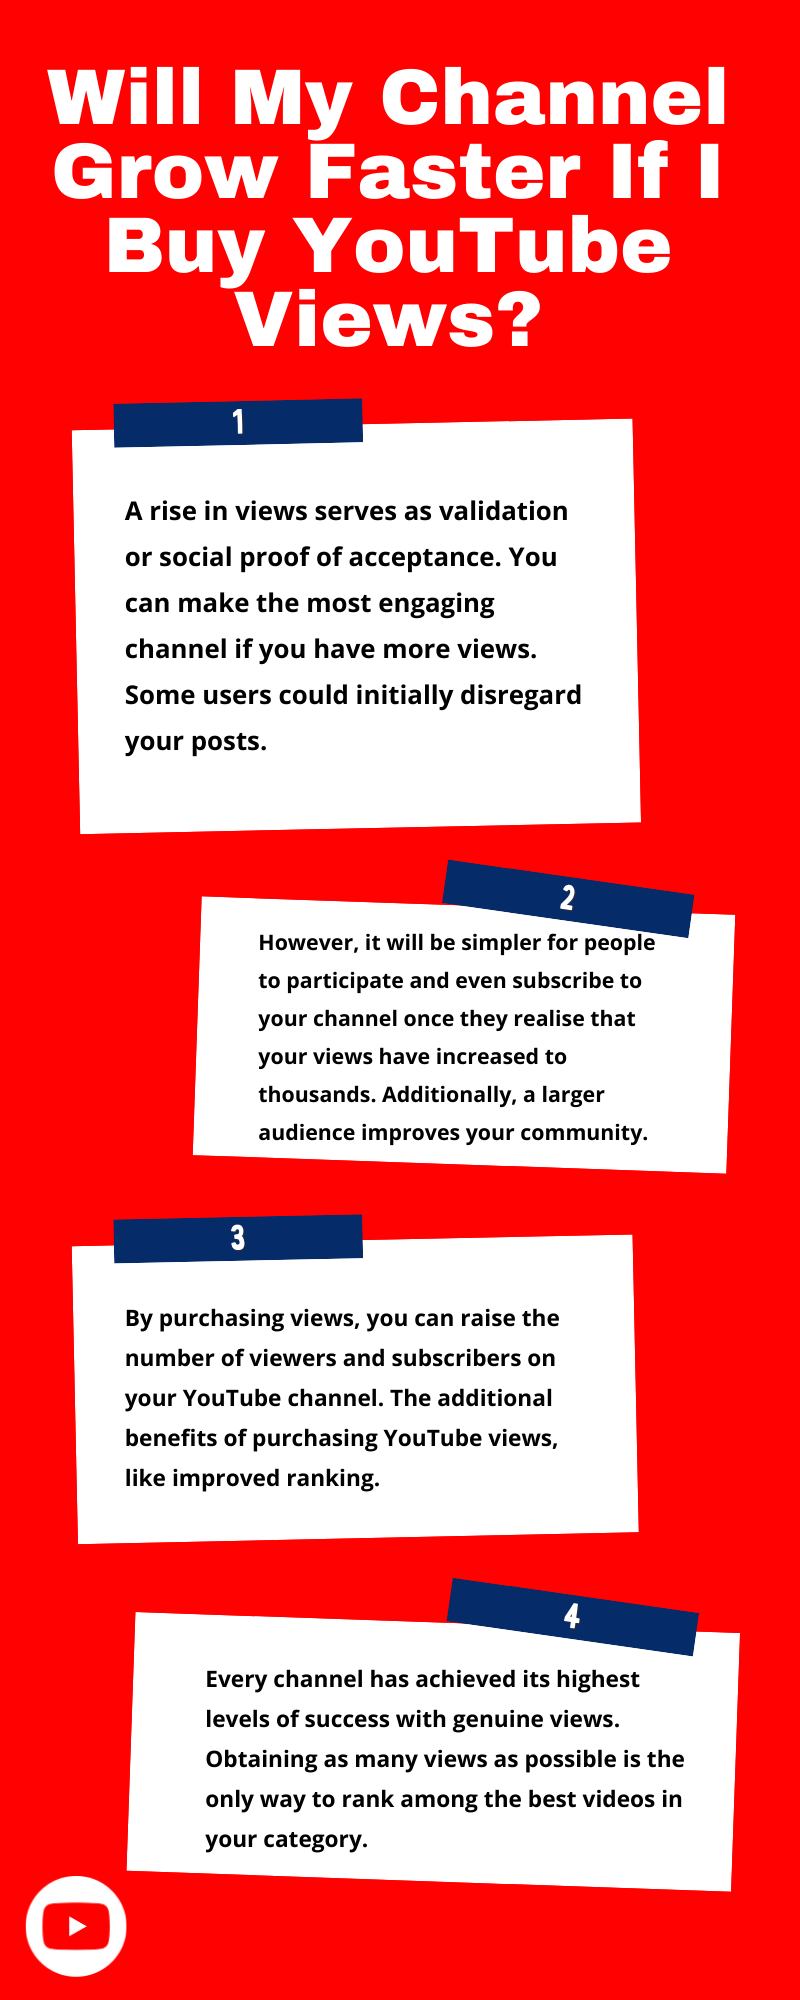 Buy YT Views To Grow Your Channel